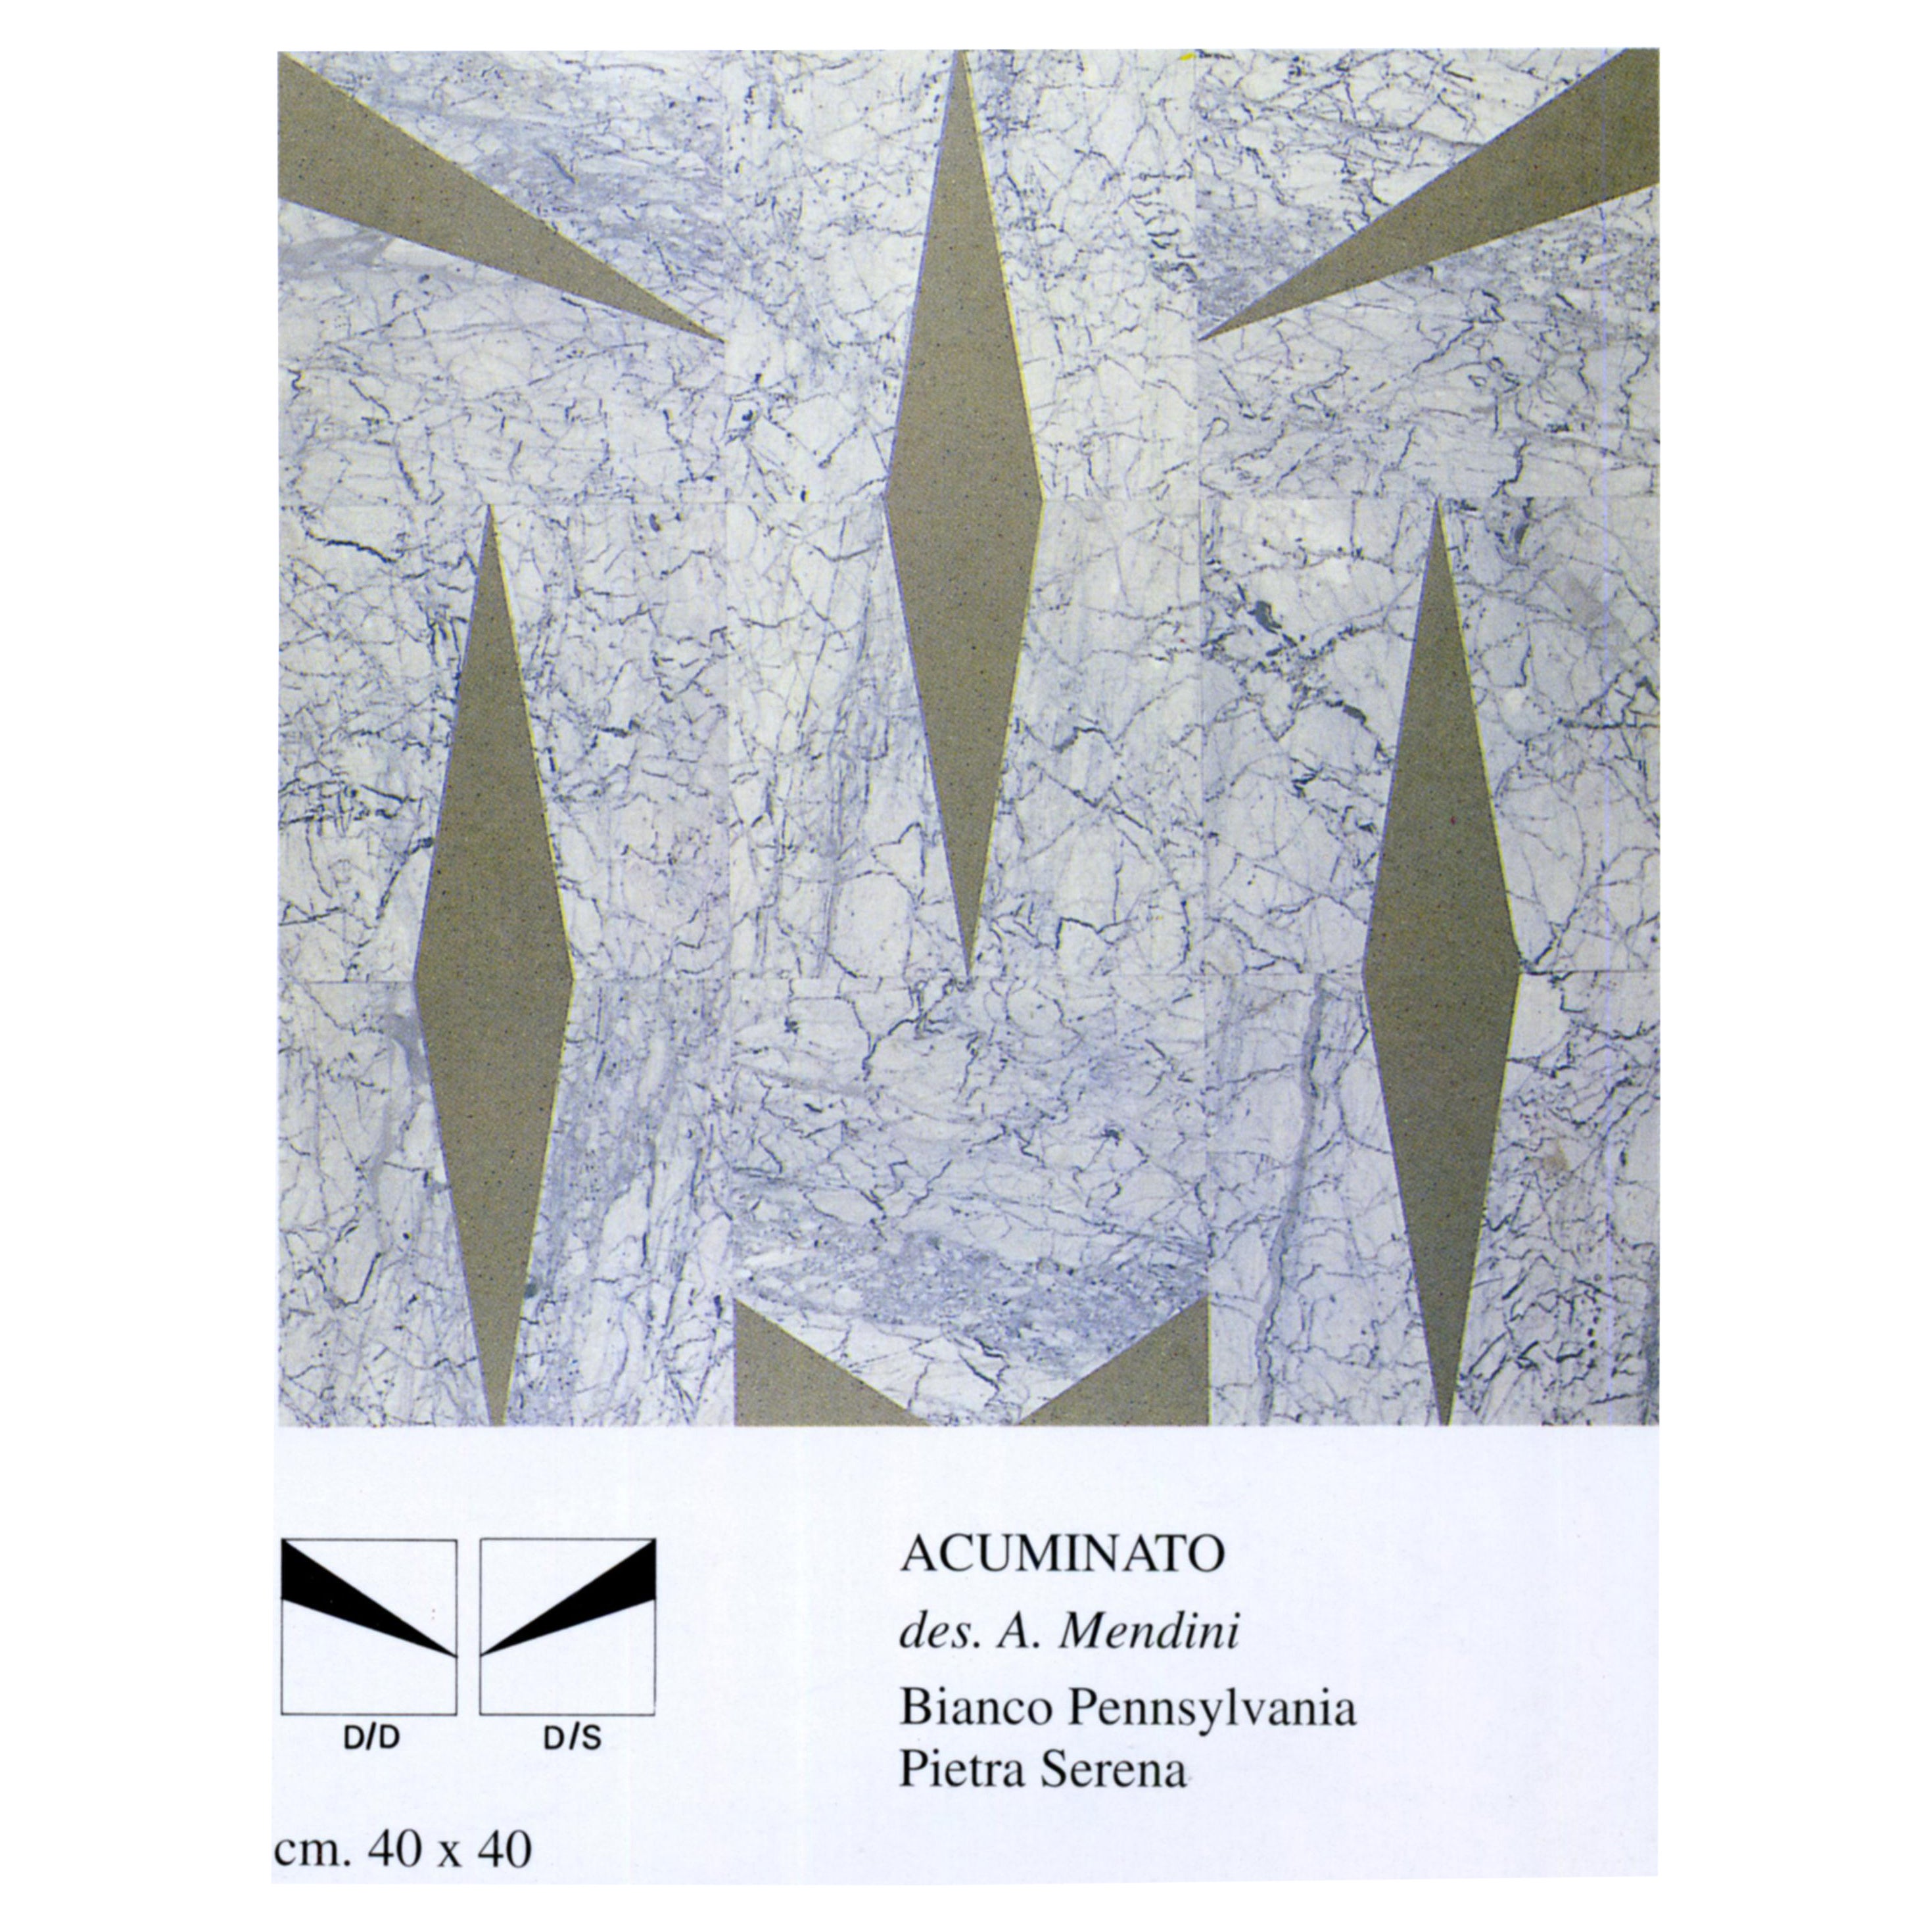 21st Century by A.Mendini "ACCUMINATO" Italian Modular Marble Floor and Coating For Sale